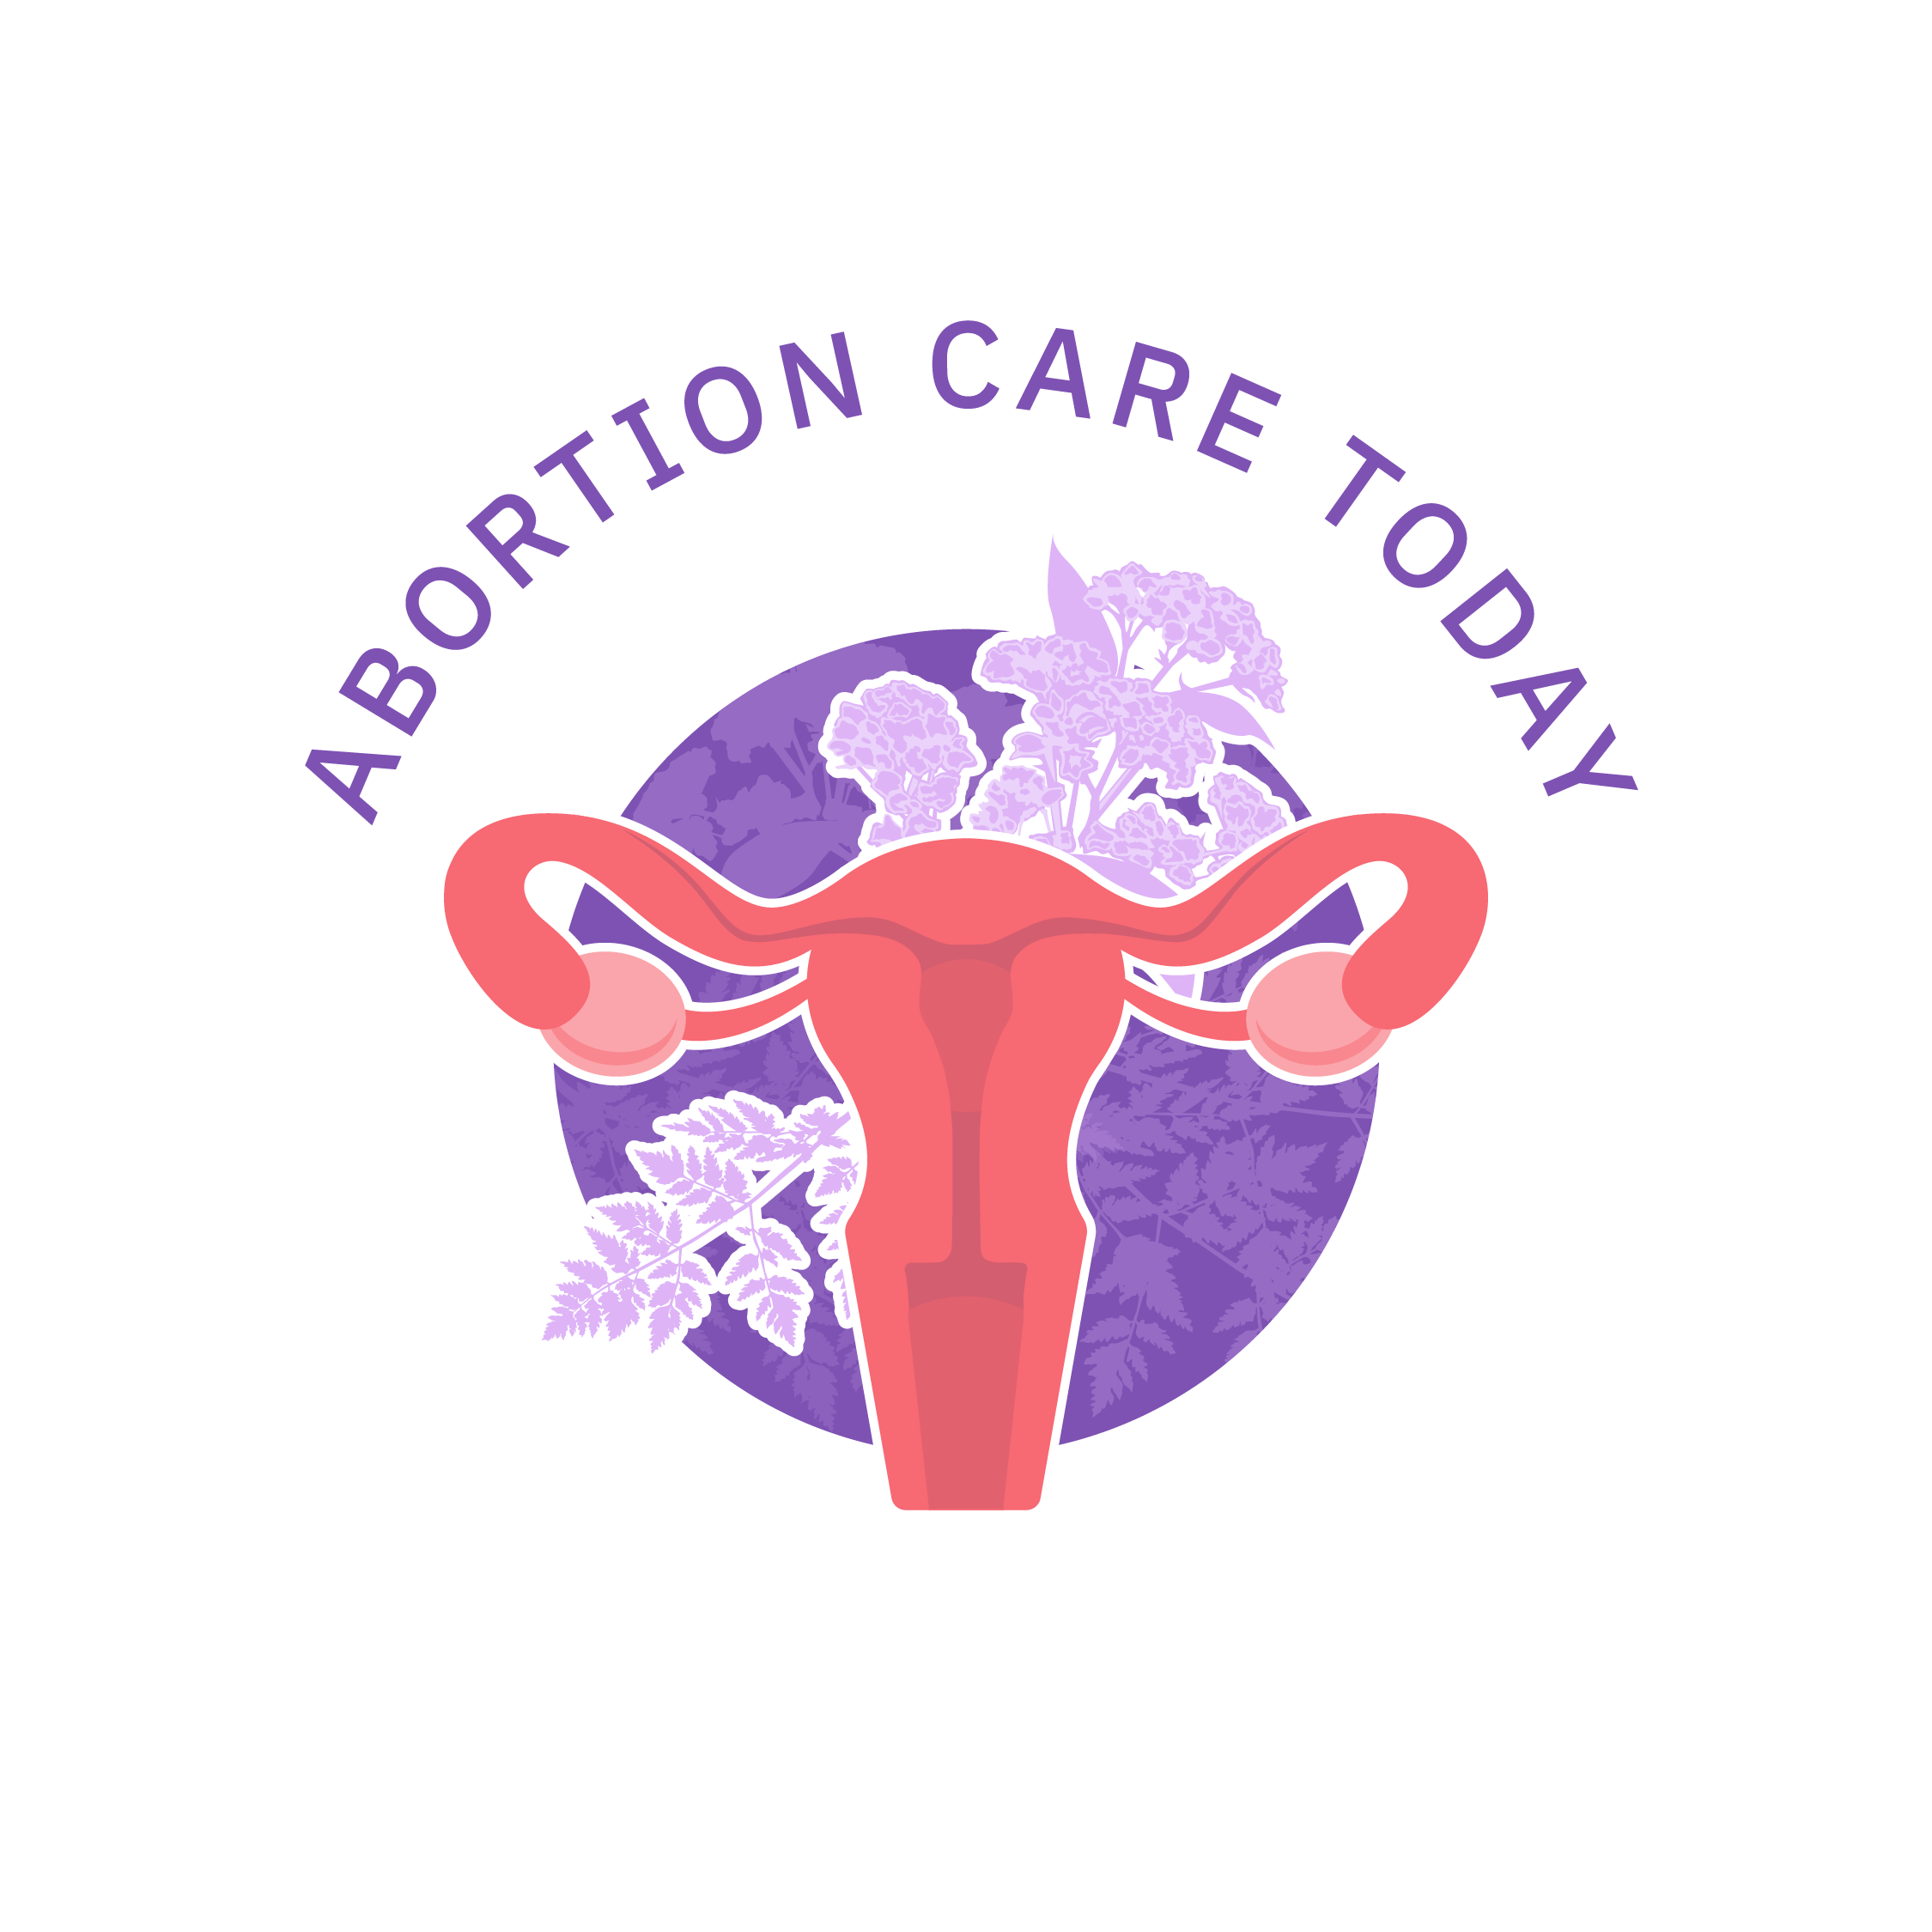 Abortion Care Today